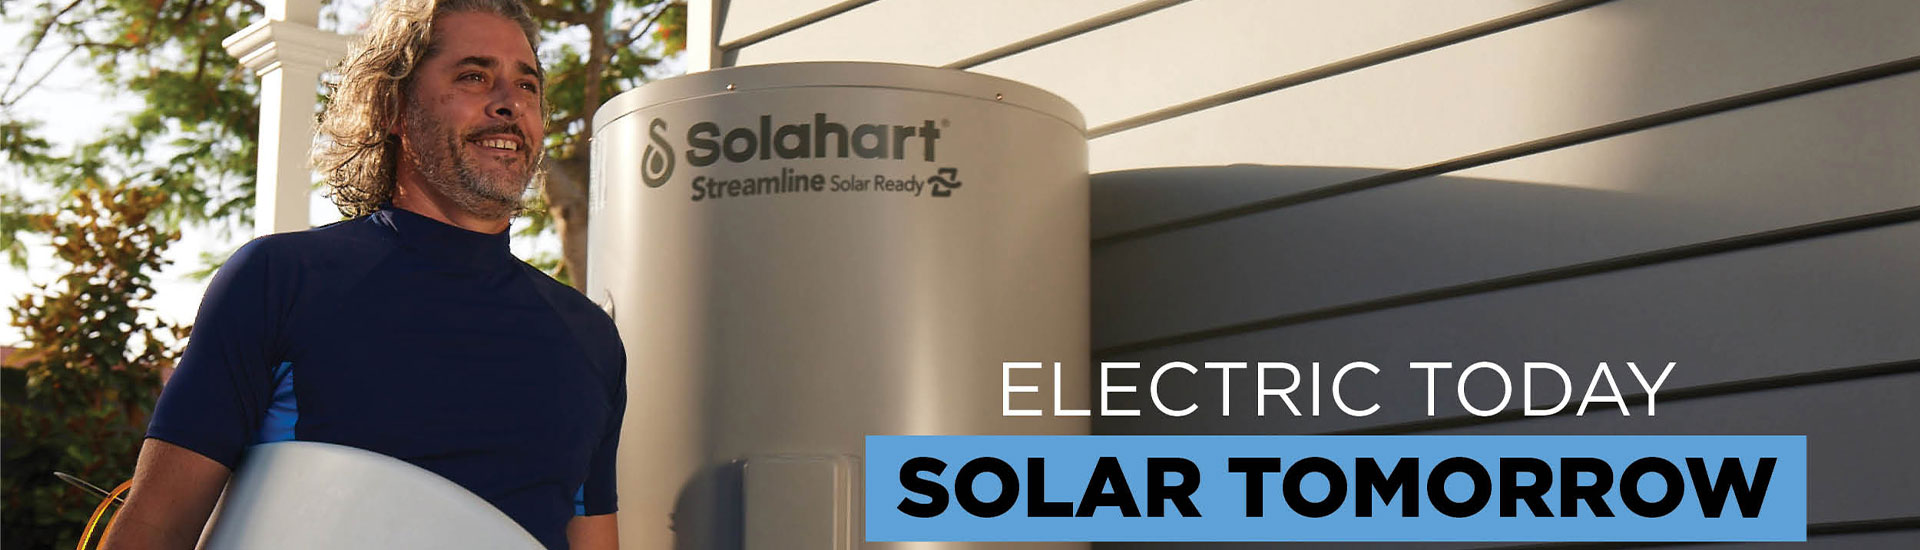 Surfer walking past a Solahart solar ready hot water system